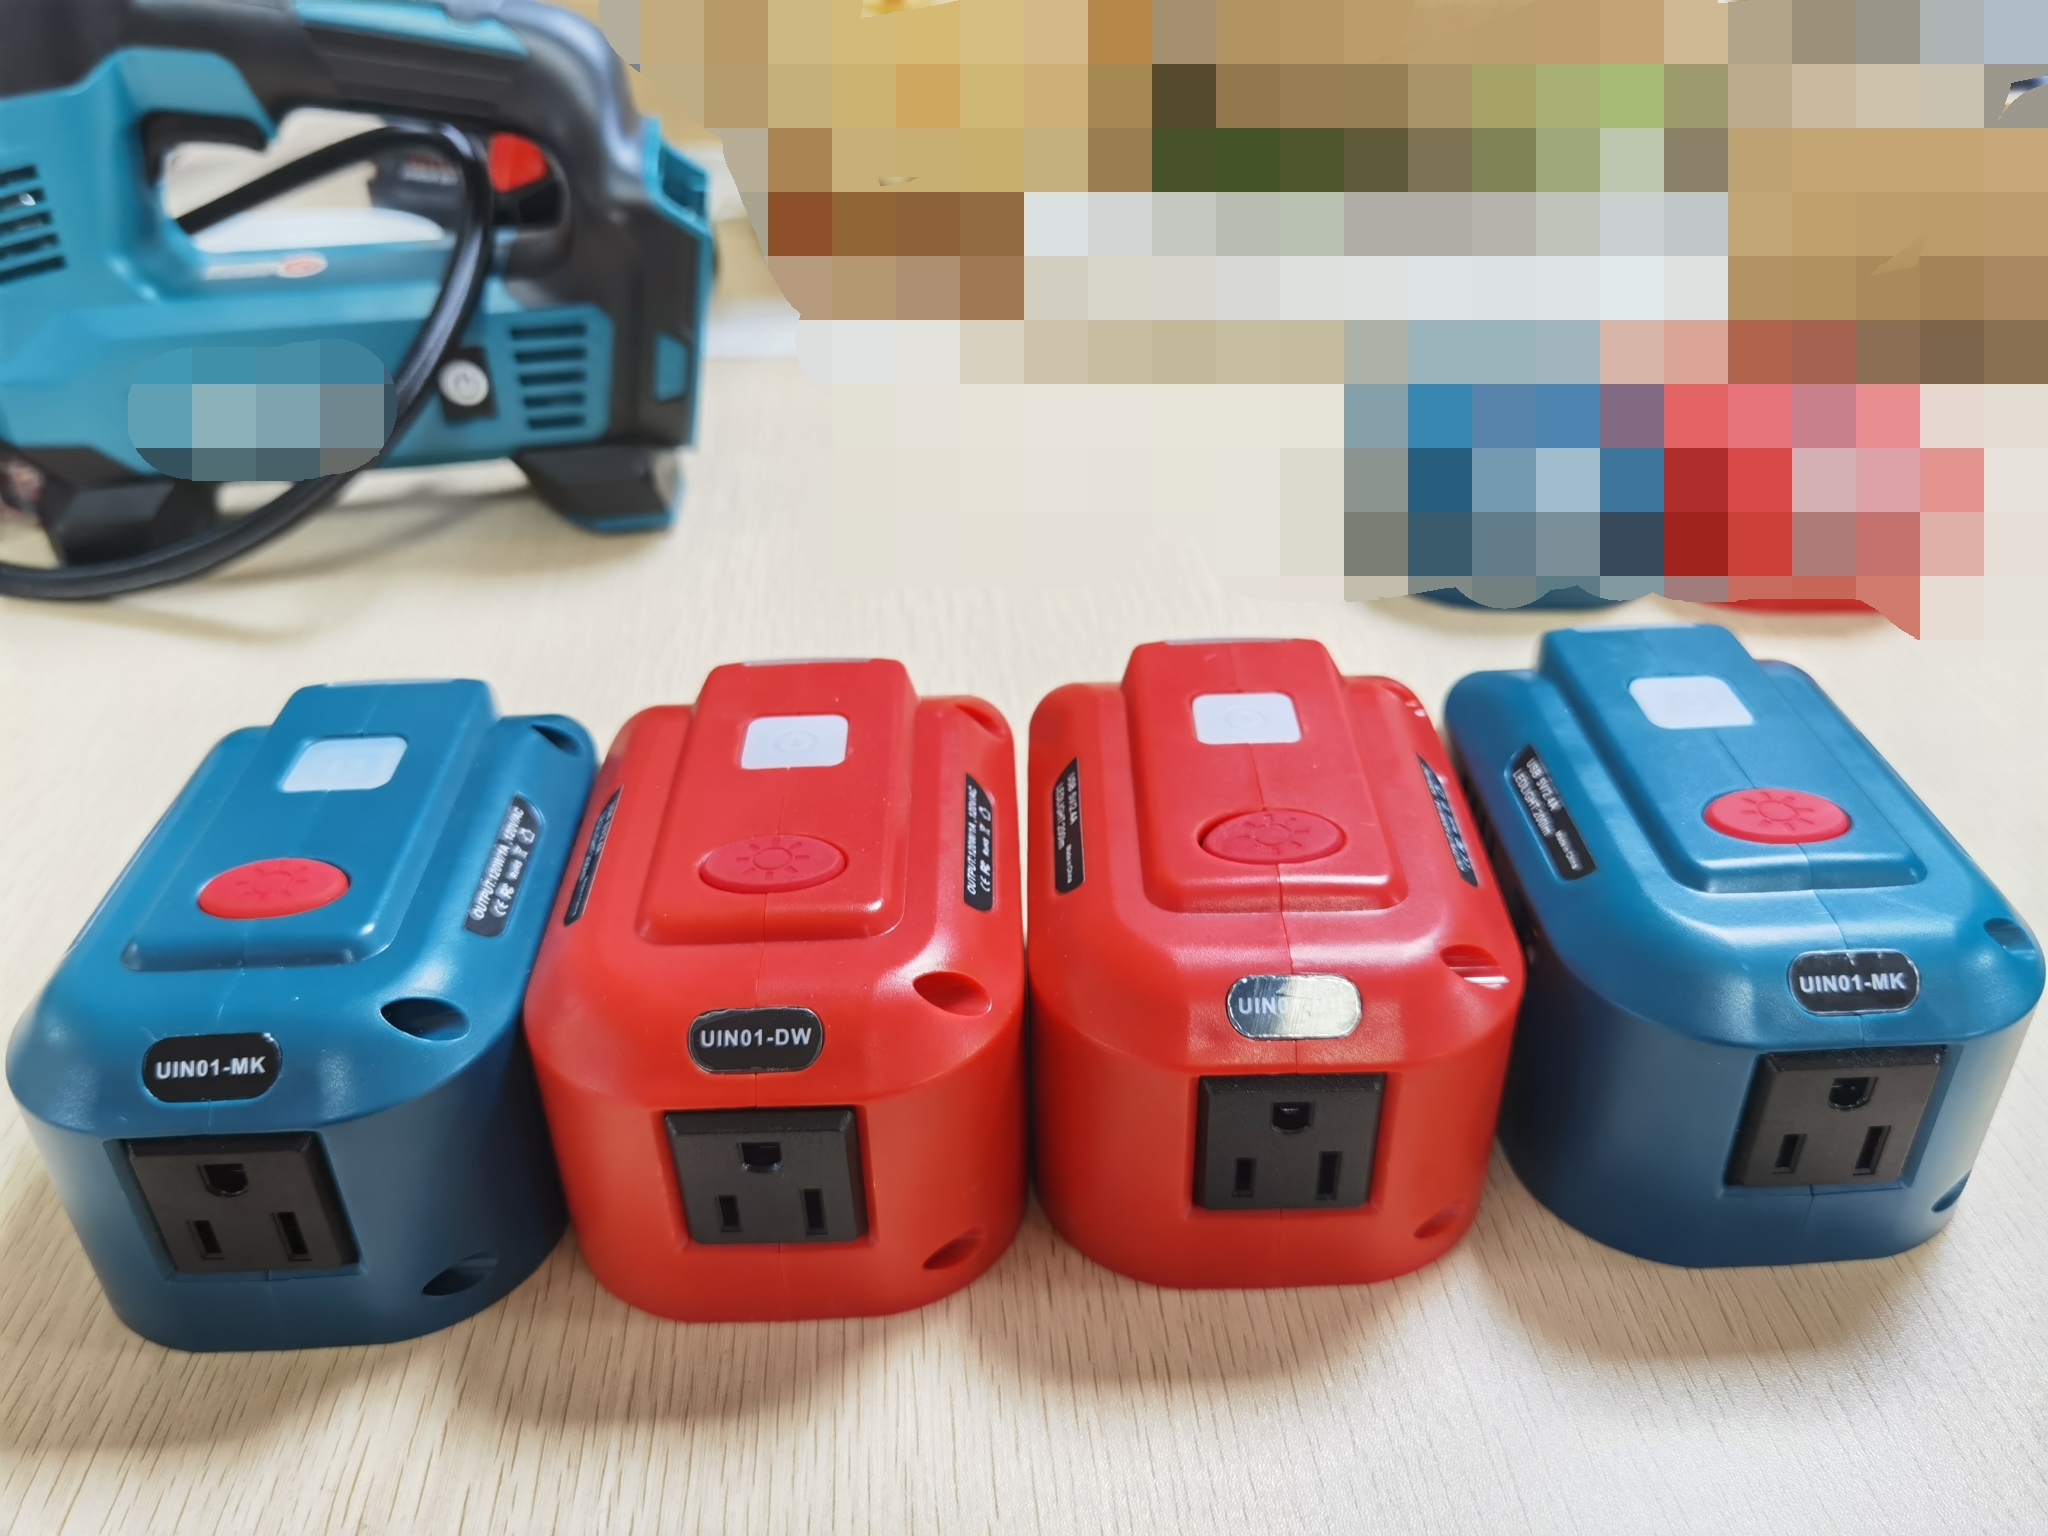 New Arrival:Welcome to use our Battery Power Inverter